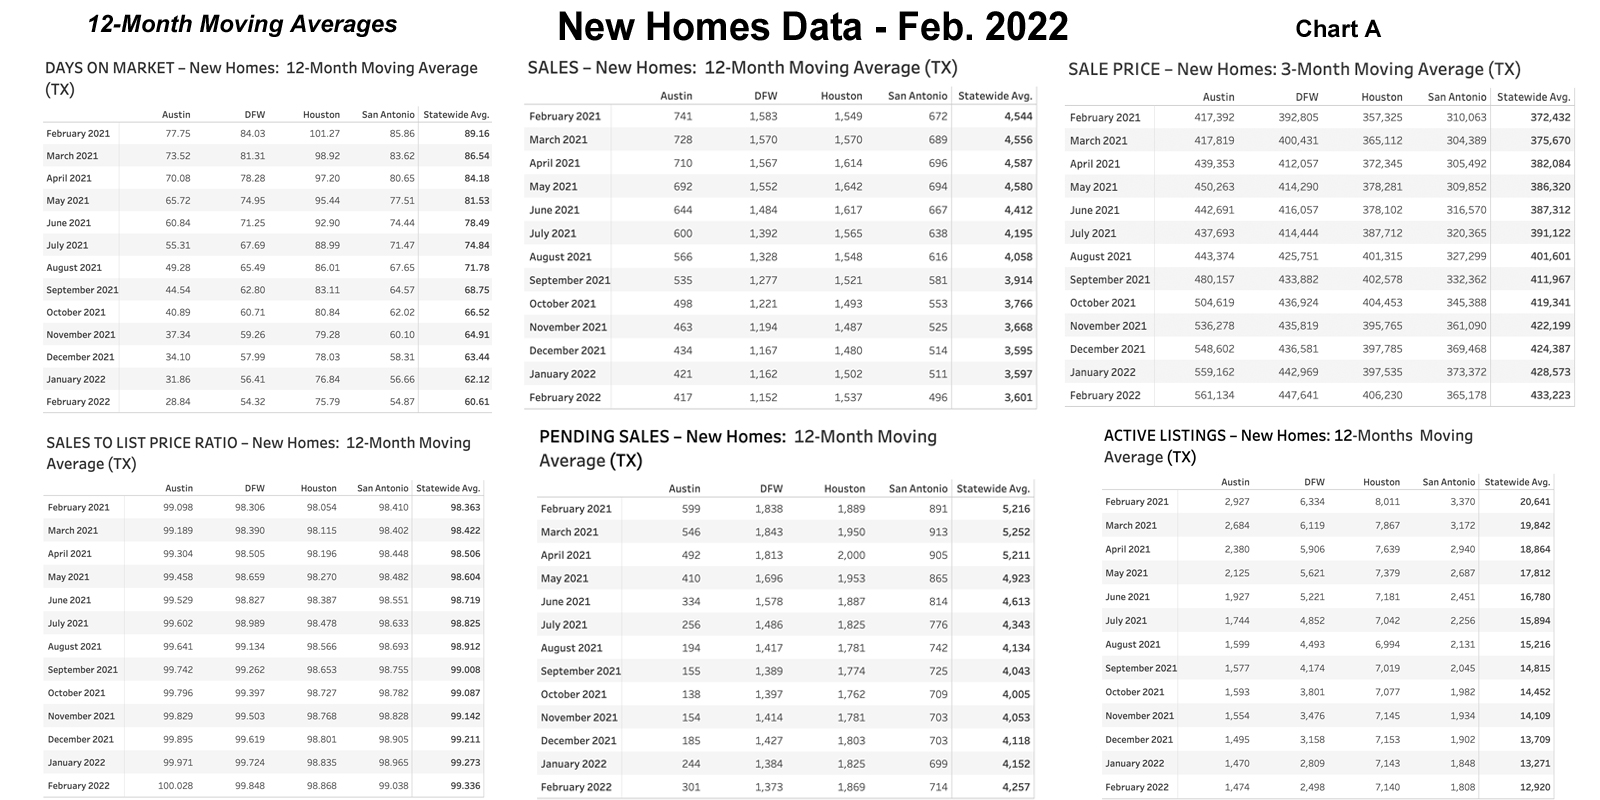 Chart A: Texas 12-Month Moving Averages – New Homes – February 2022